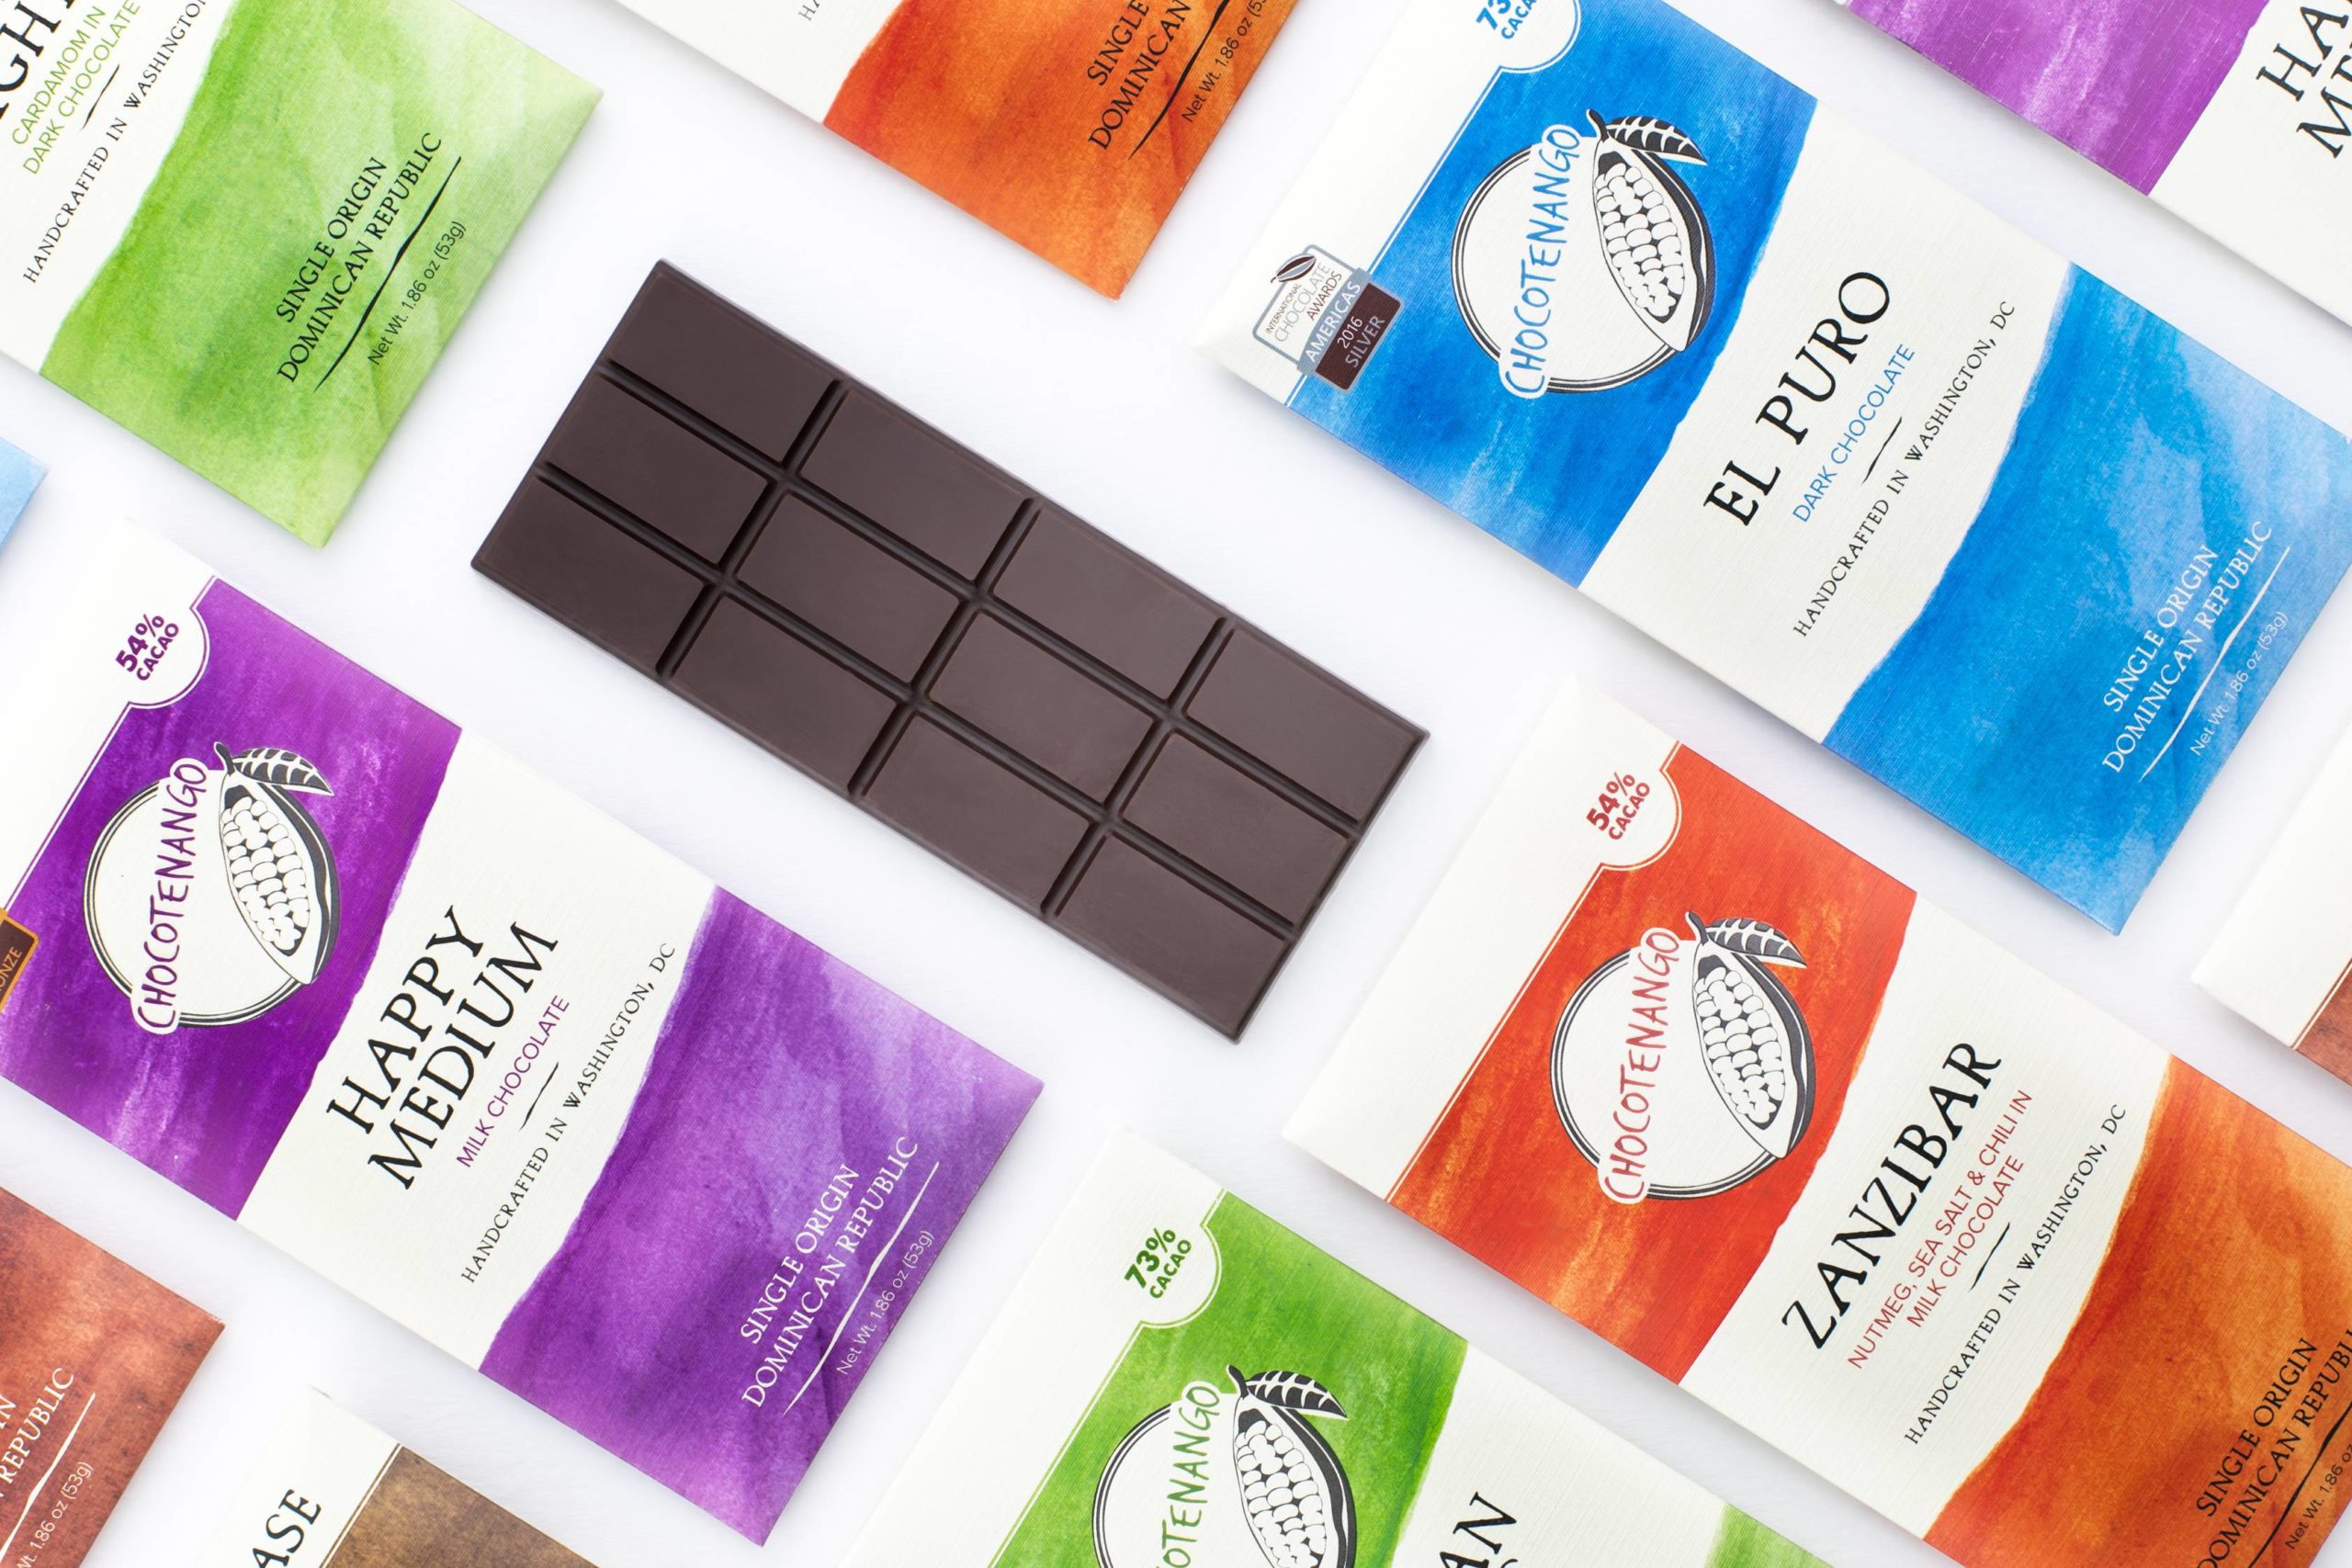 Bean-to-bar-chocolates-made-in-dc-product-photography-LetiKugler